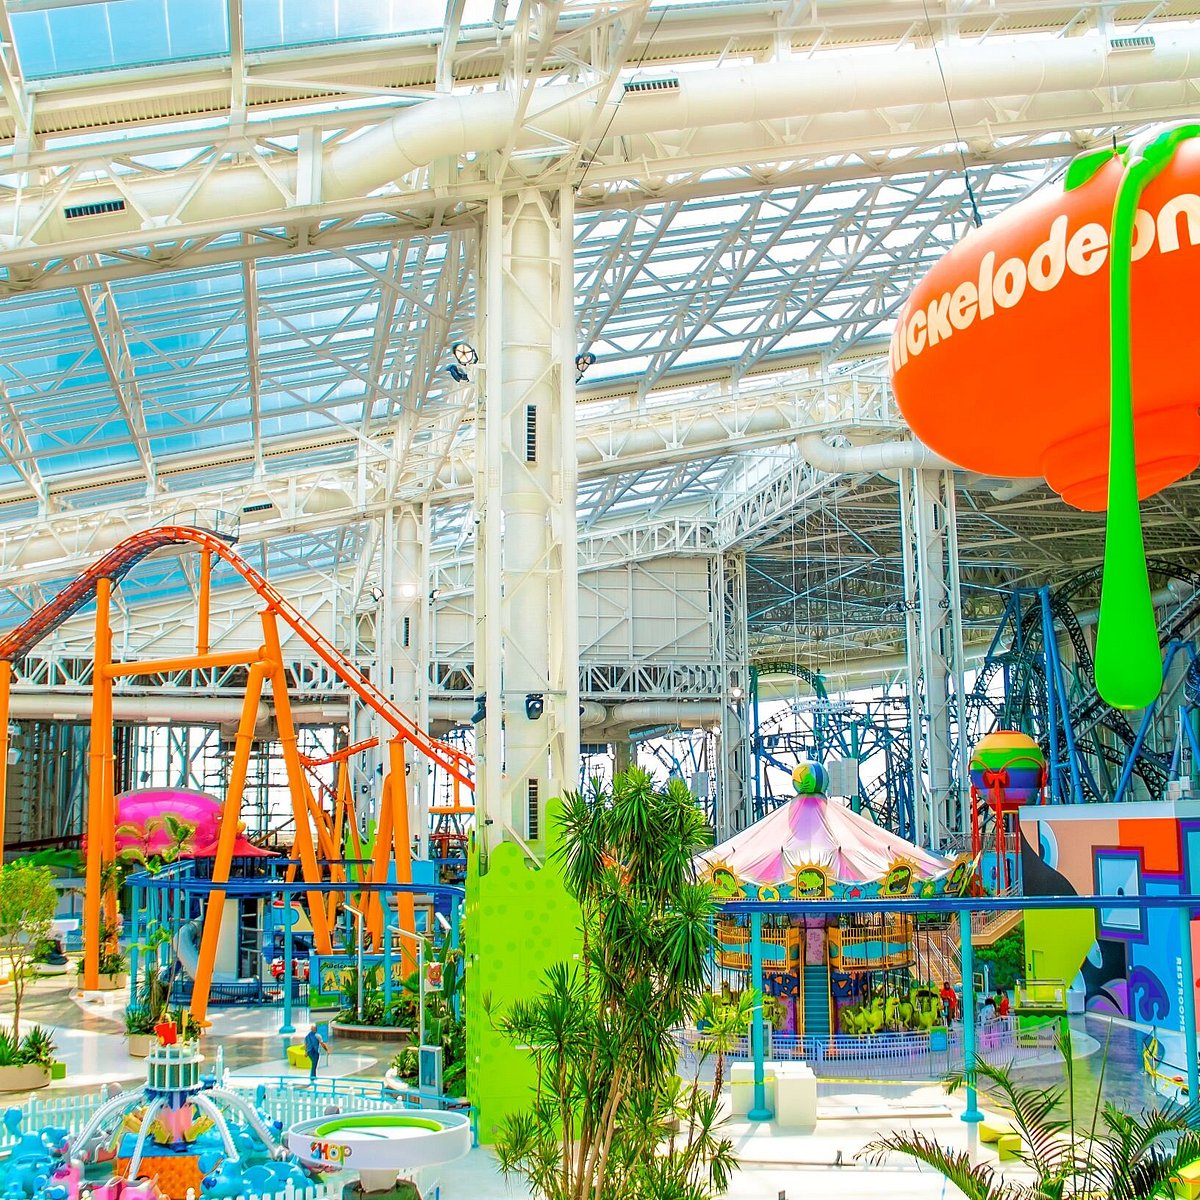 Nickelodeon Universe (Mall Of America) Tour & Review with The Legend 